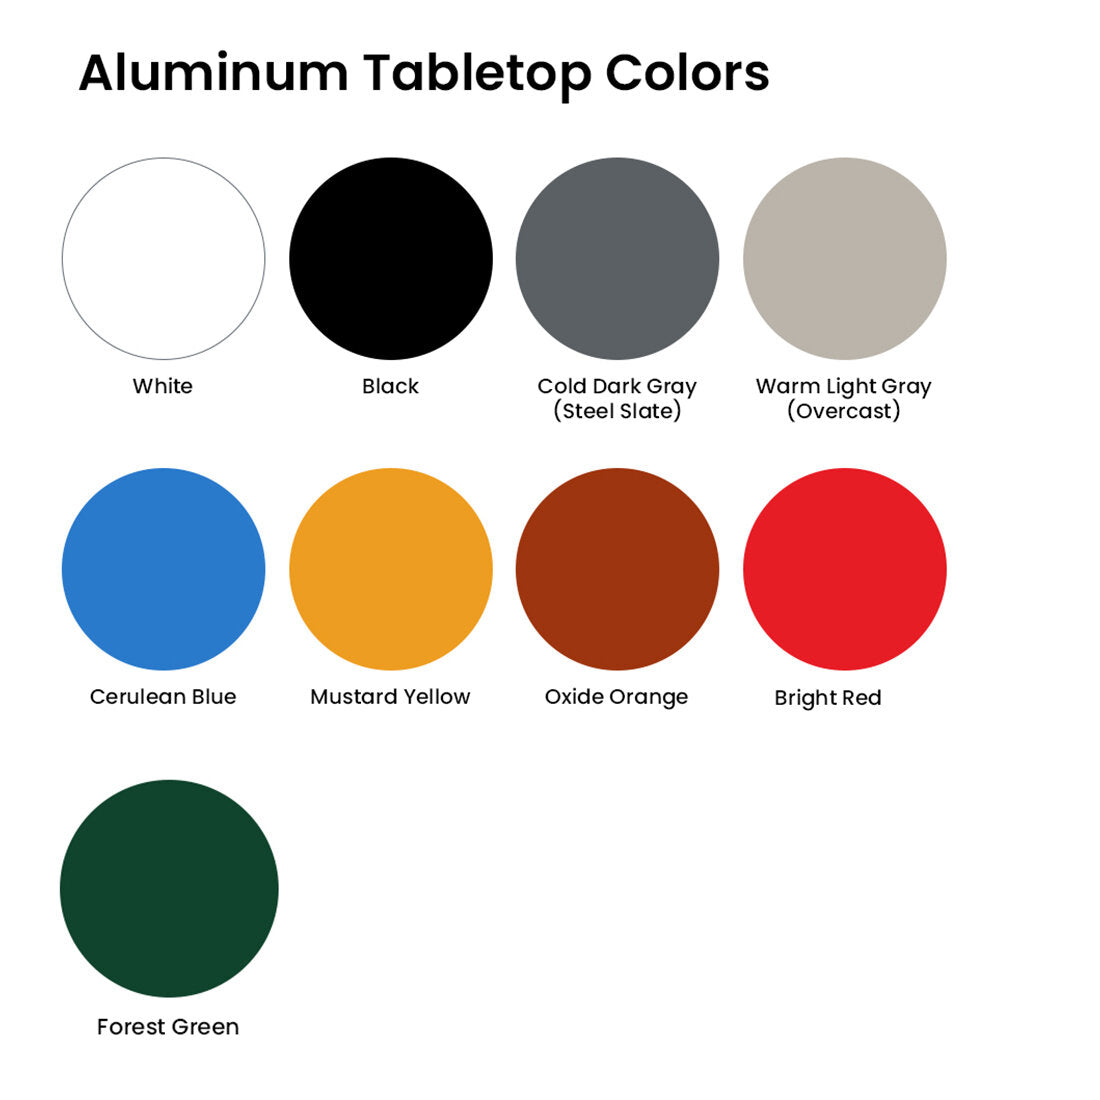 Aluminum color swatches for tabletop cover - 9 different color choices